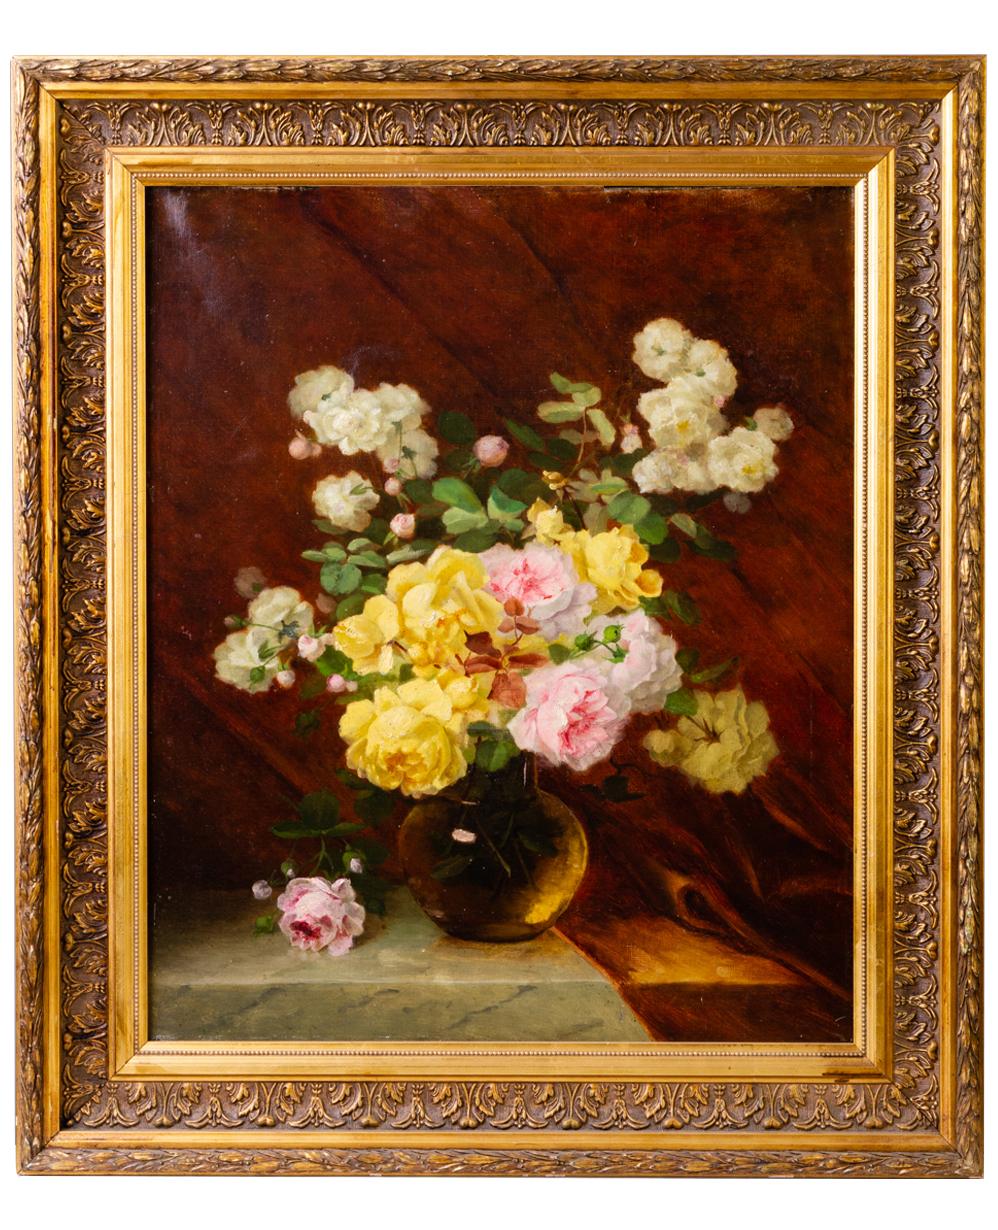 O/8157 - Old French painting with a beautiful bouquet of roses in a vase on a table. It almost seems to smell it...
If you want, You can use the elegant frame for a mirror, leaving the picture free.  I think it's a smart solution.